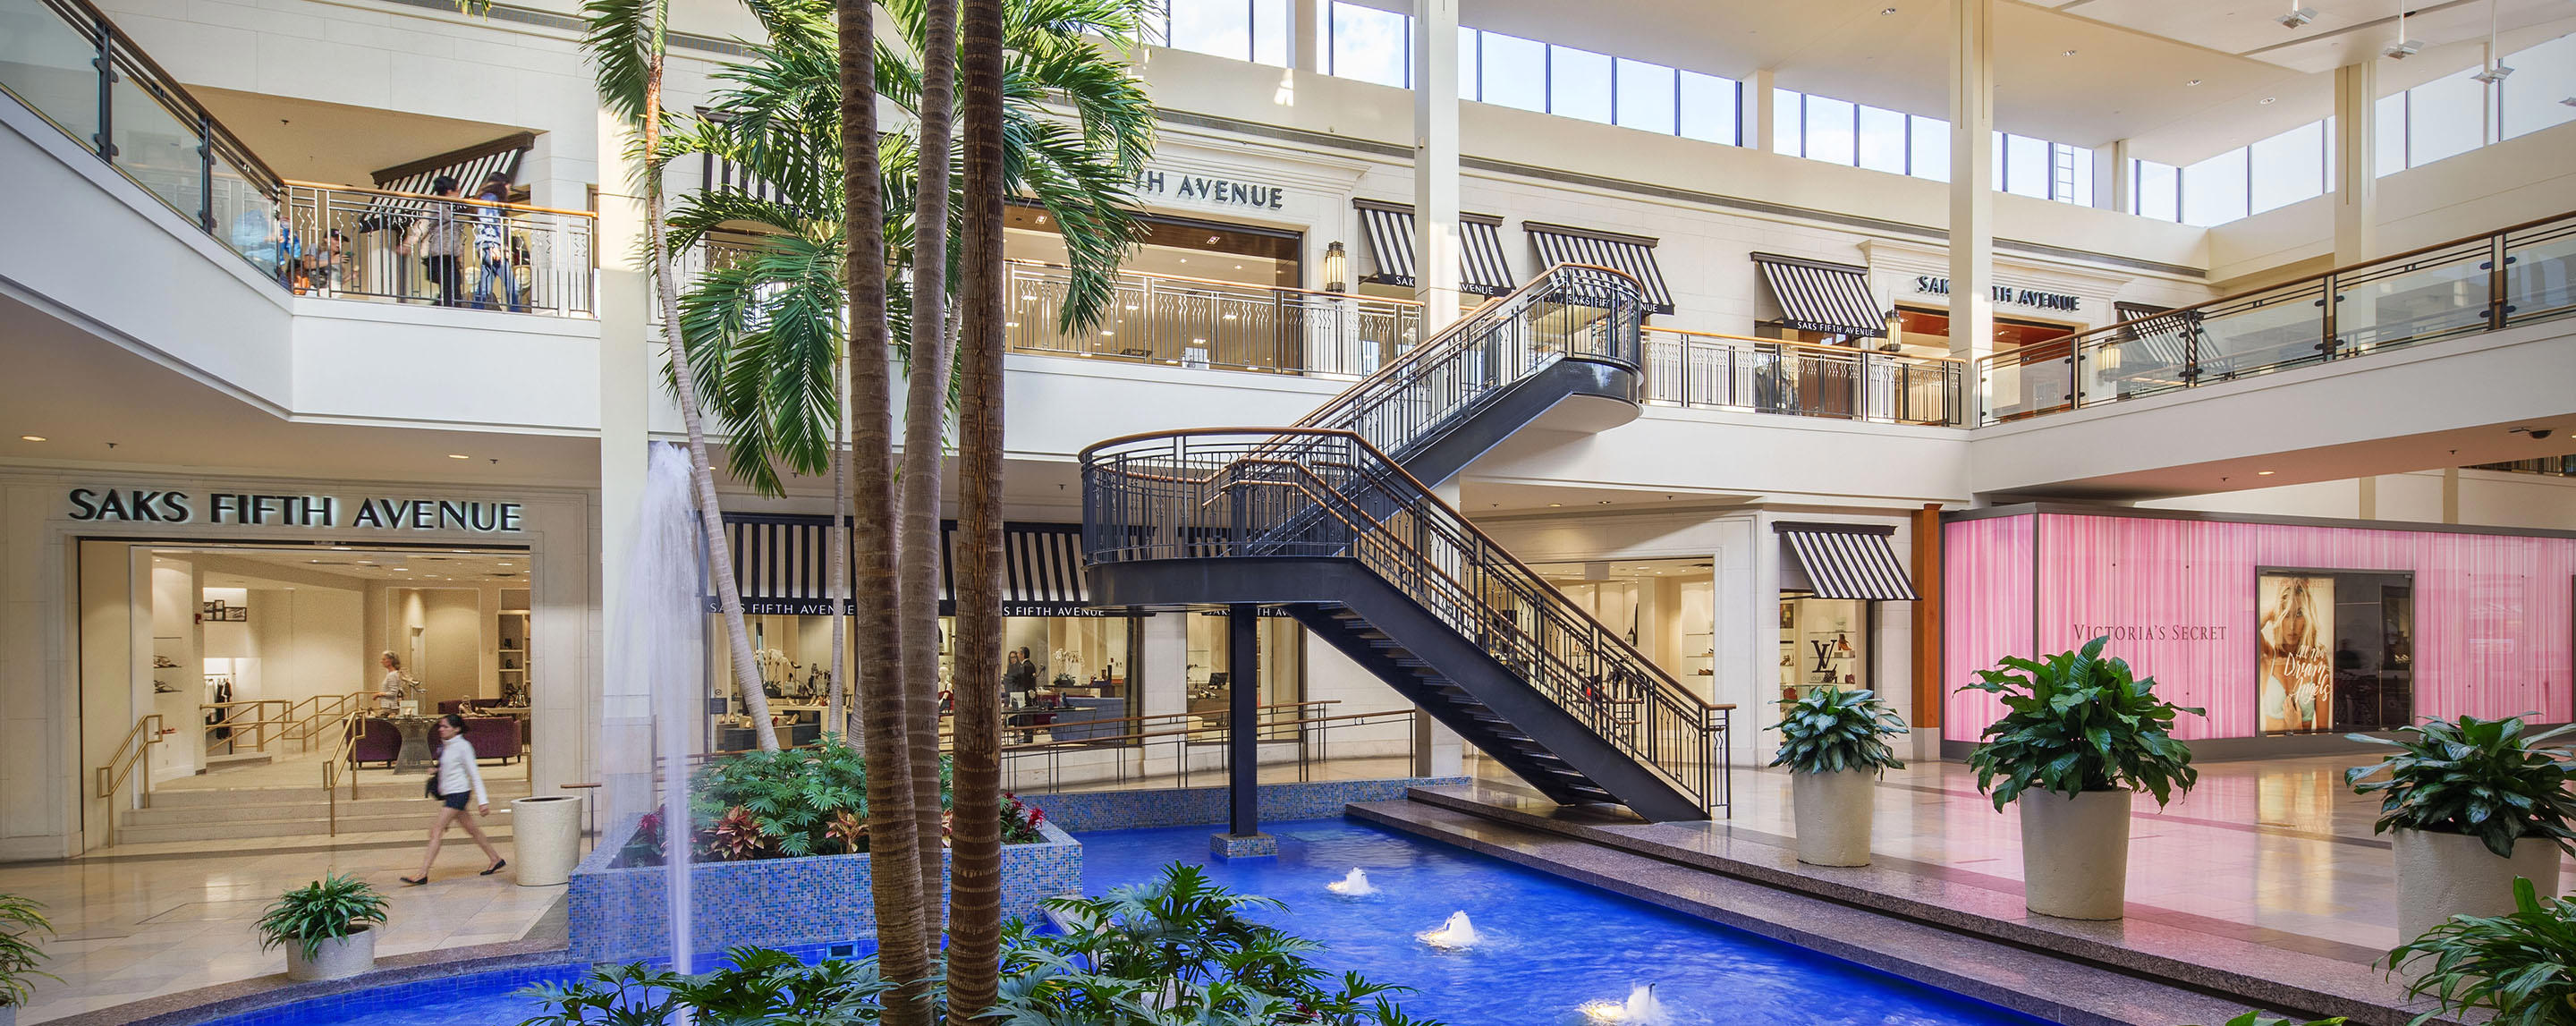 Interior of a mall with two levels connected by a staircase.